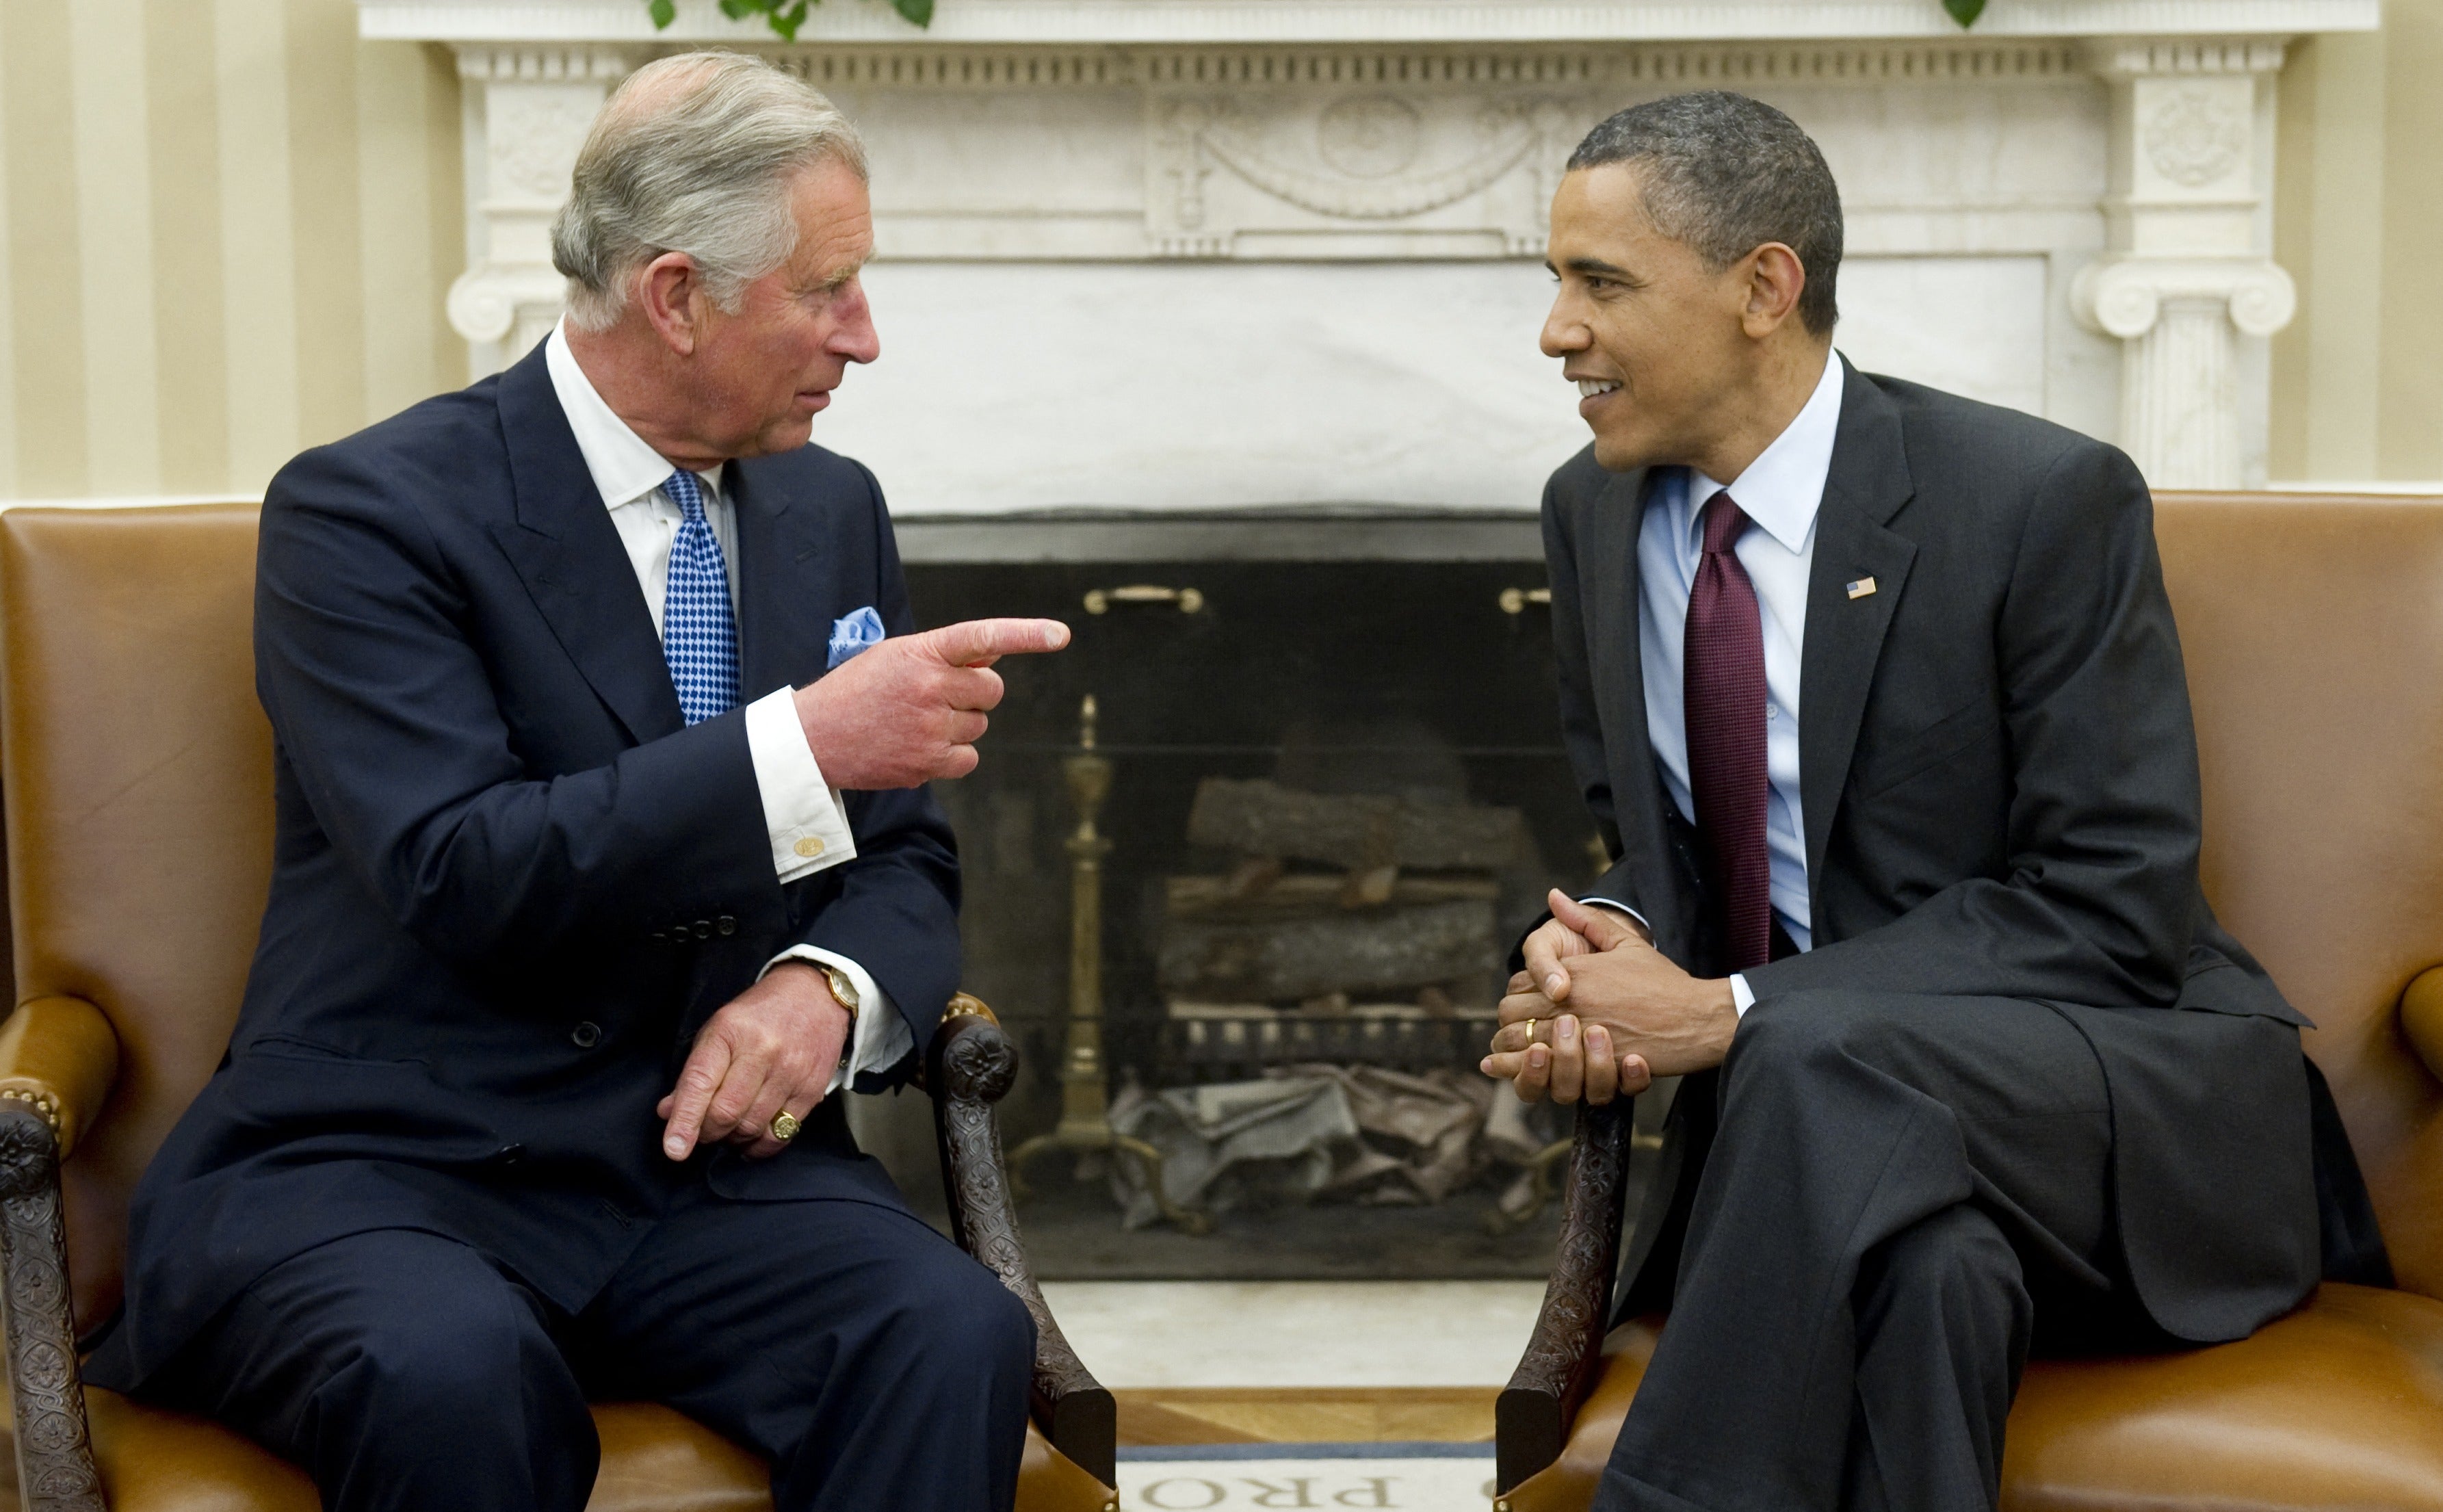 Barack Obama hosts Prince Charles at the White House in May 2011